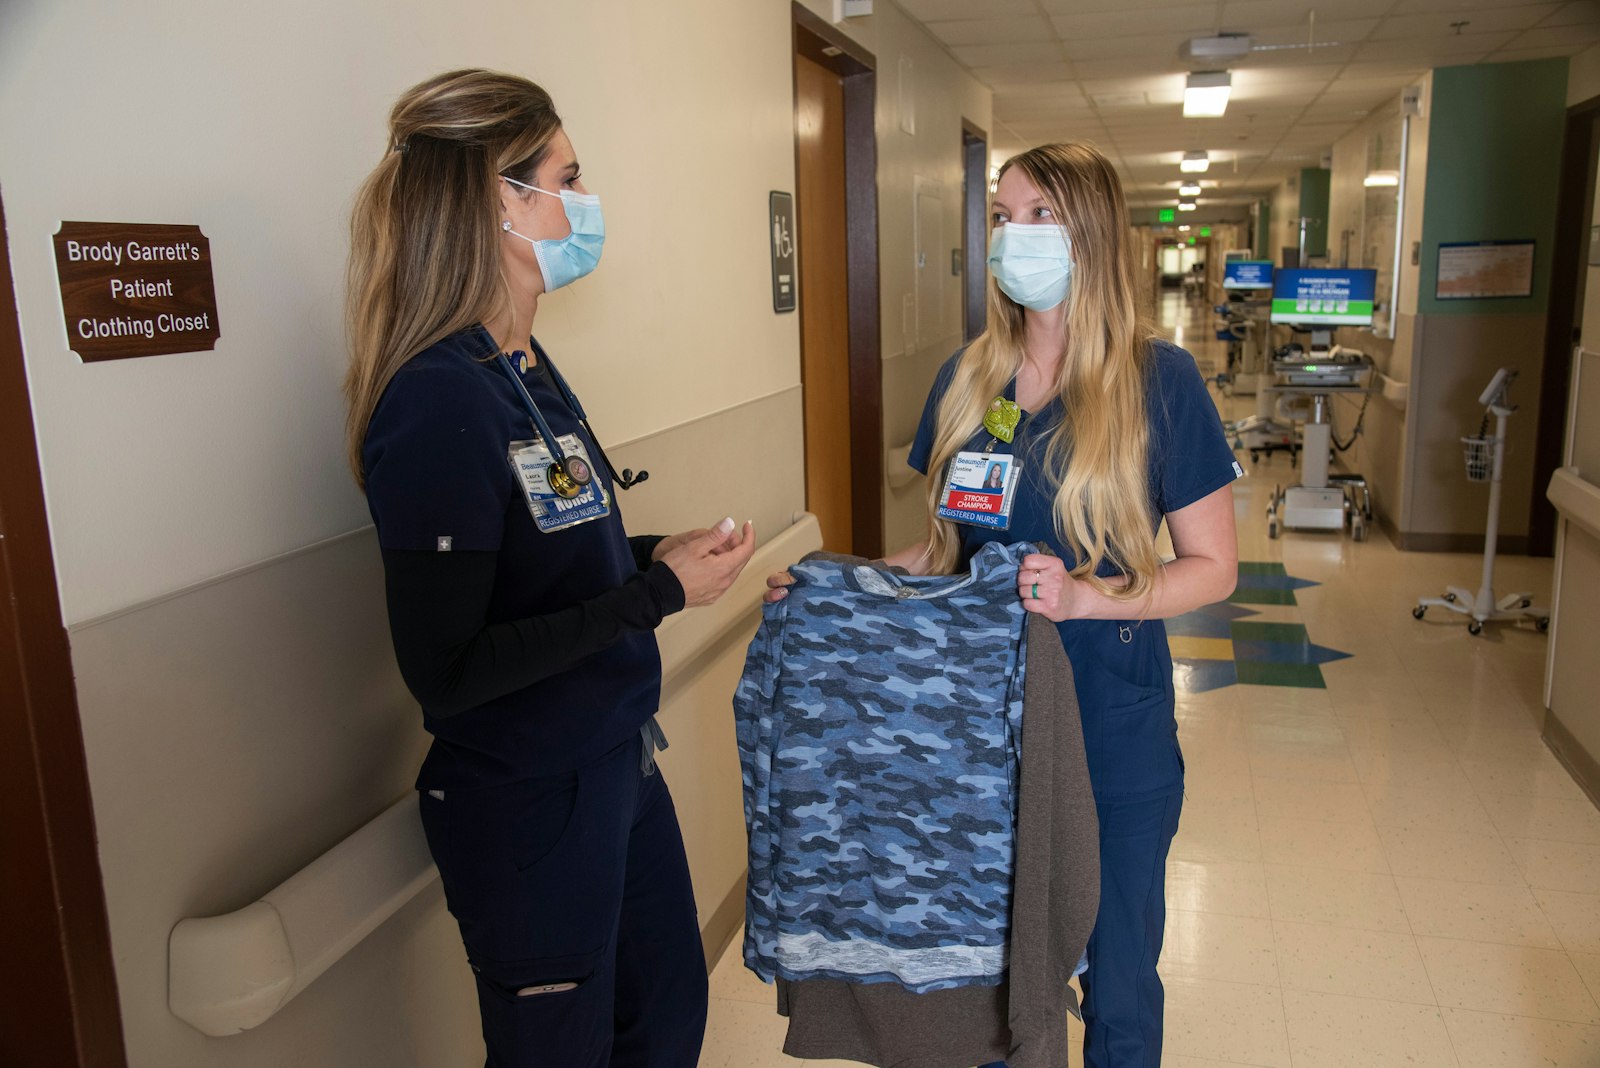 Thomson said the clothing closet initiative has been a morale boost to stressed hospital staff members as COVID-19 cases rise. "We needed some spark of something positive," Thomson said. "It reminds us why we're in this field."